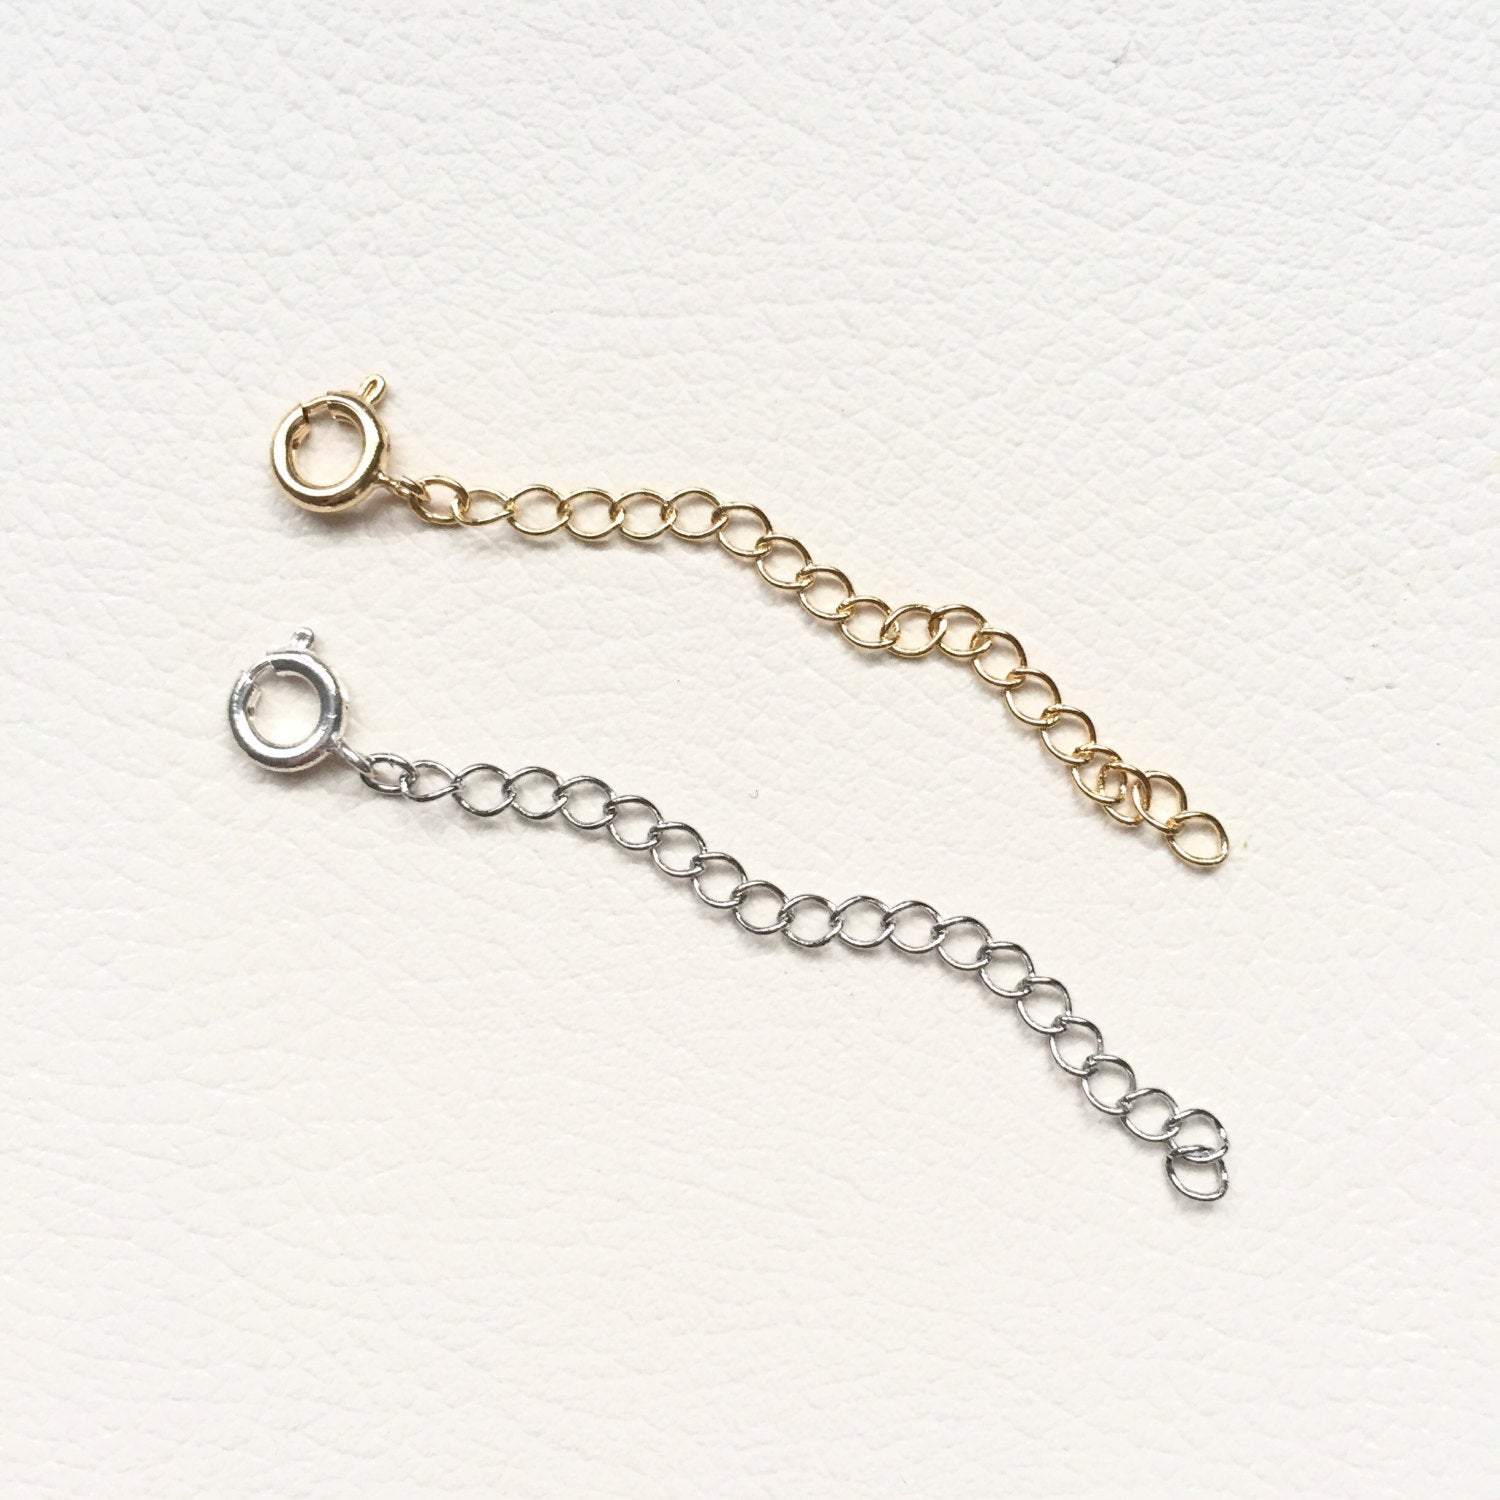 Necklace Extender - Any Length!